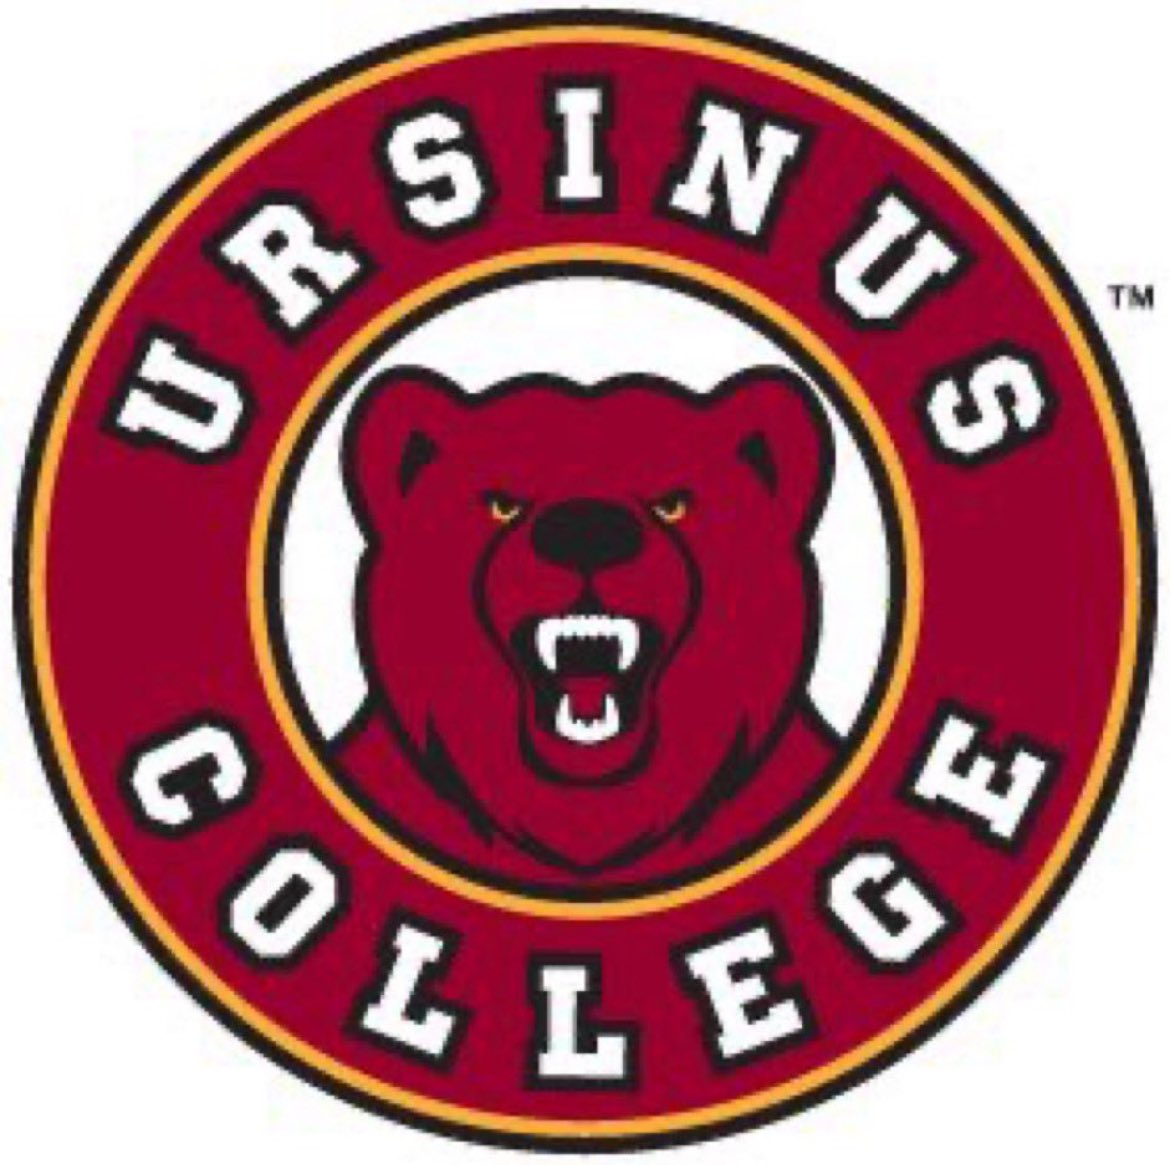 Thank you @CoachQuigsUC for coming out today and talking to me about football and great opportunities at Ursinus!@CoachFulltime19 @hs_mercer